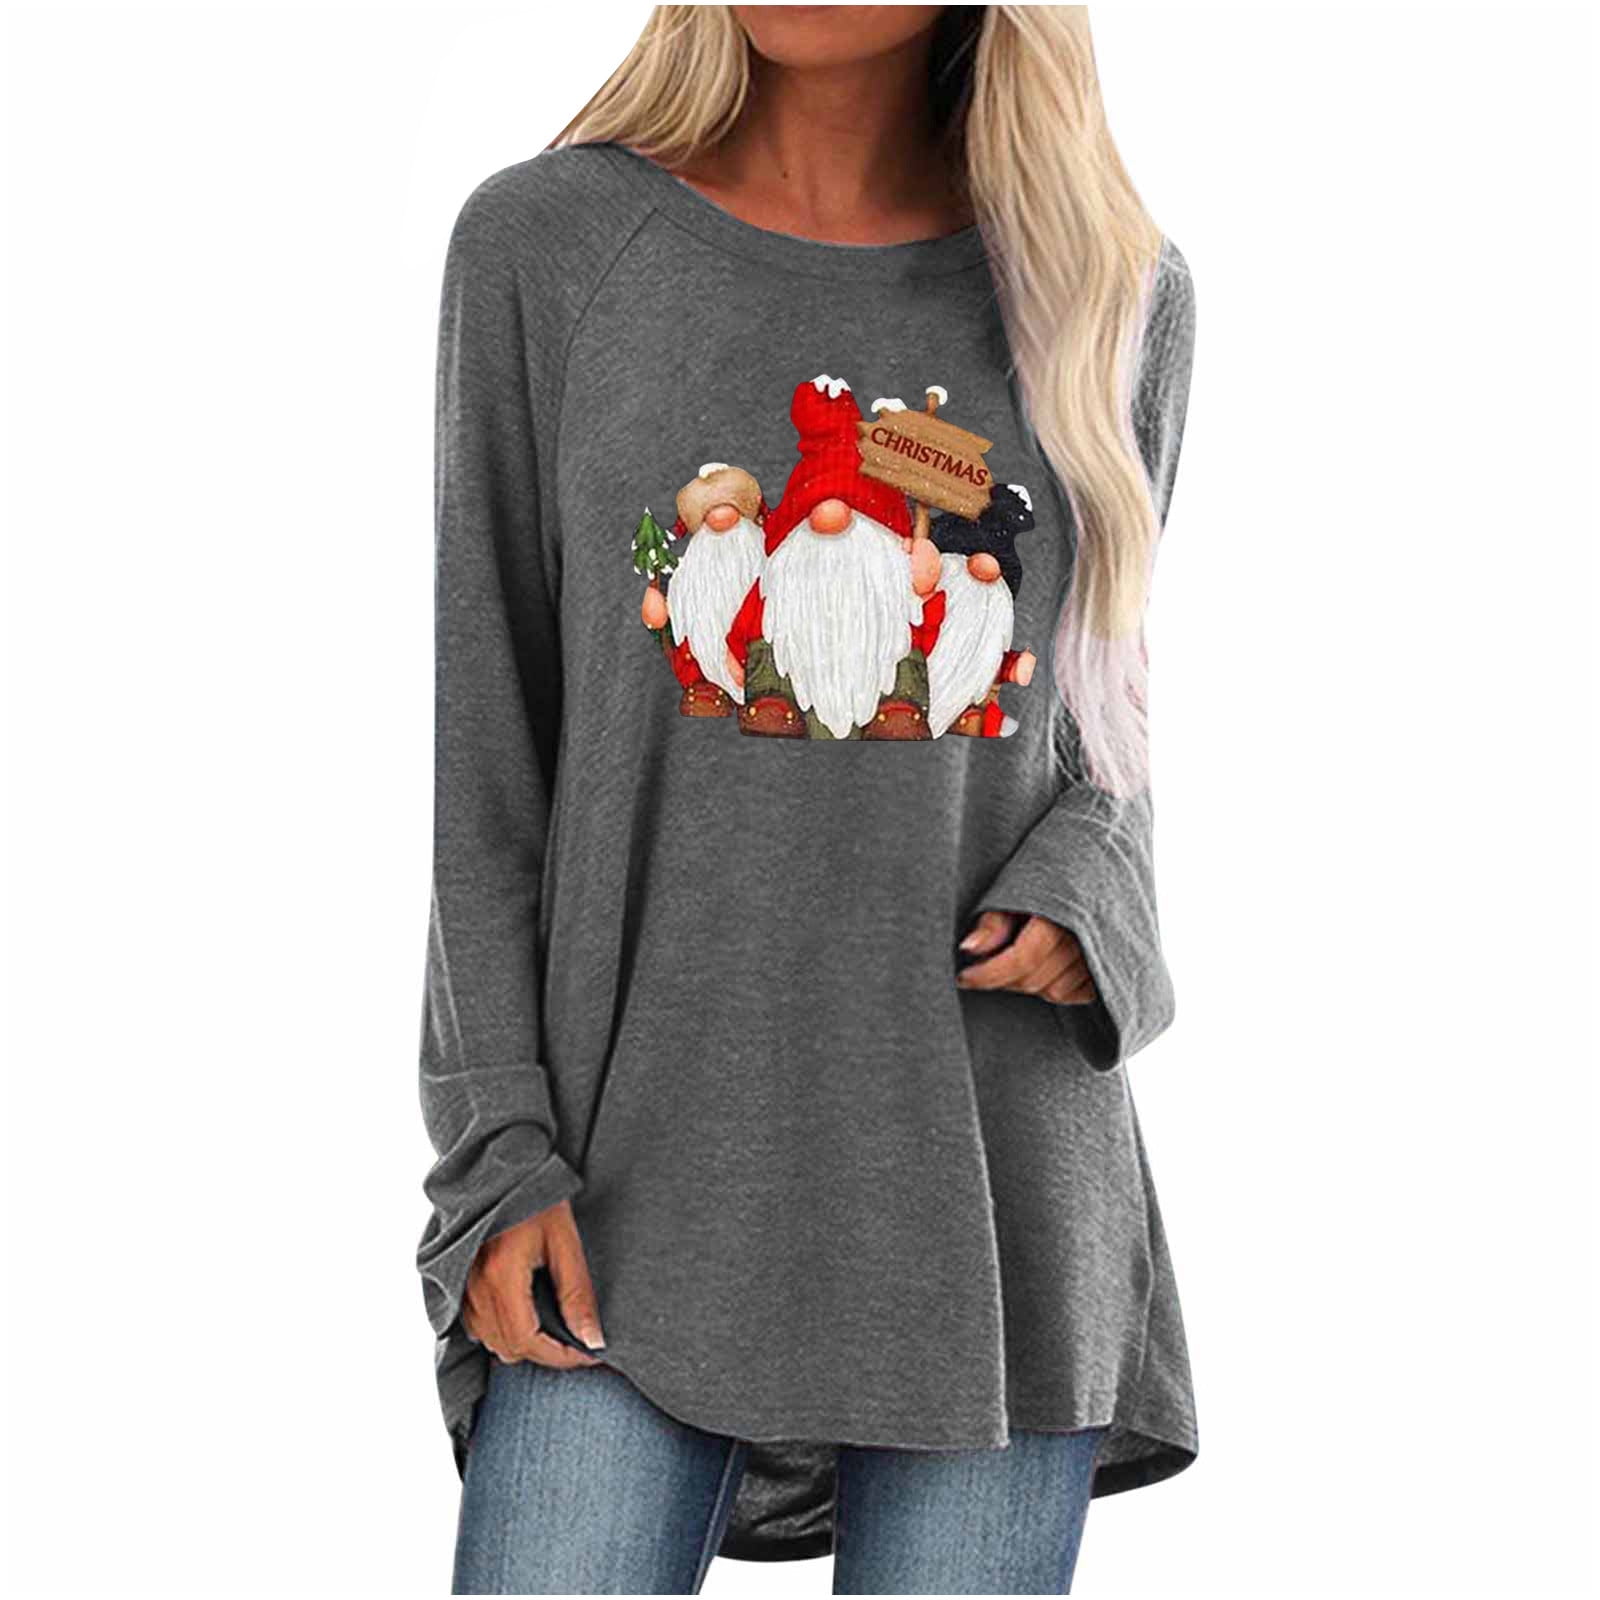 Kayannuo Christmas Clearance Ladies Tops Long Sleeve Round Neck ...